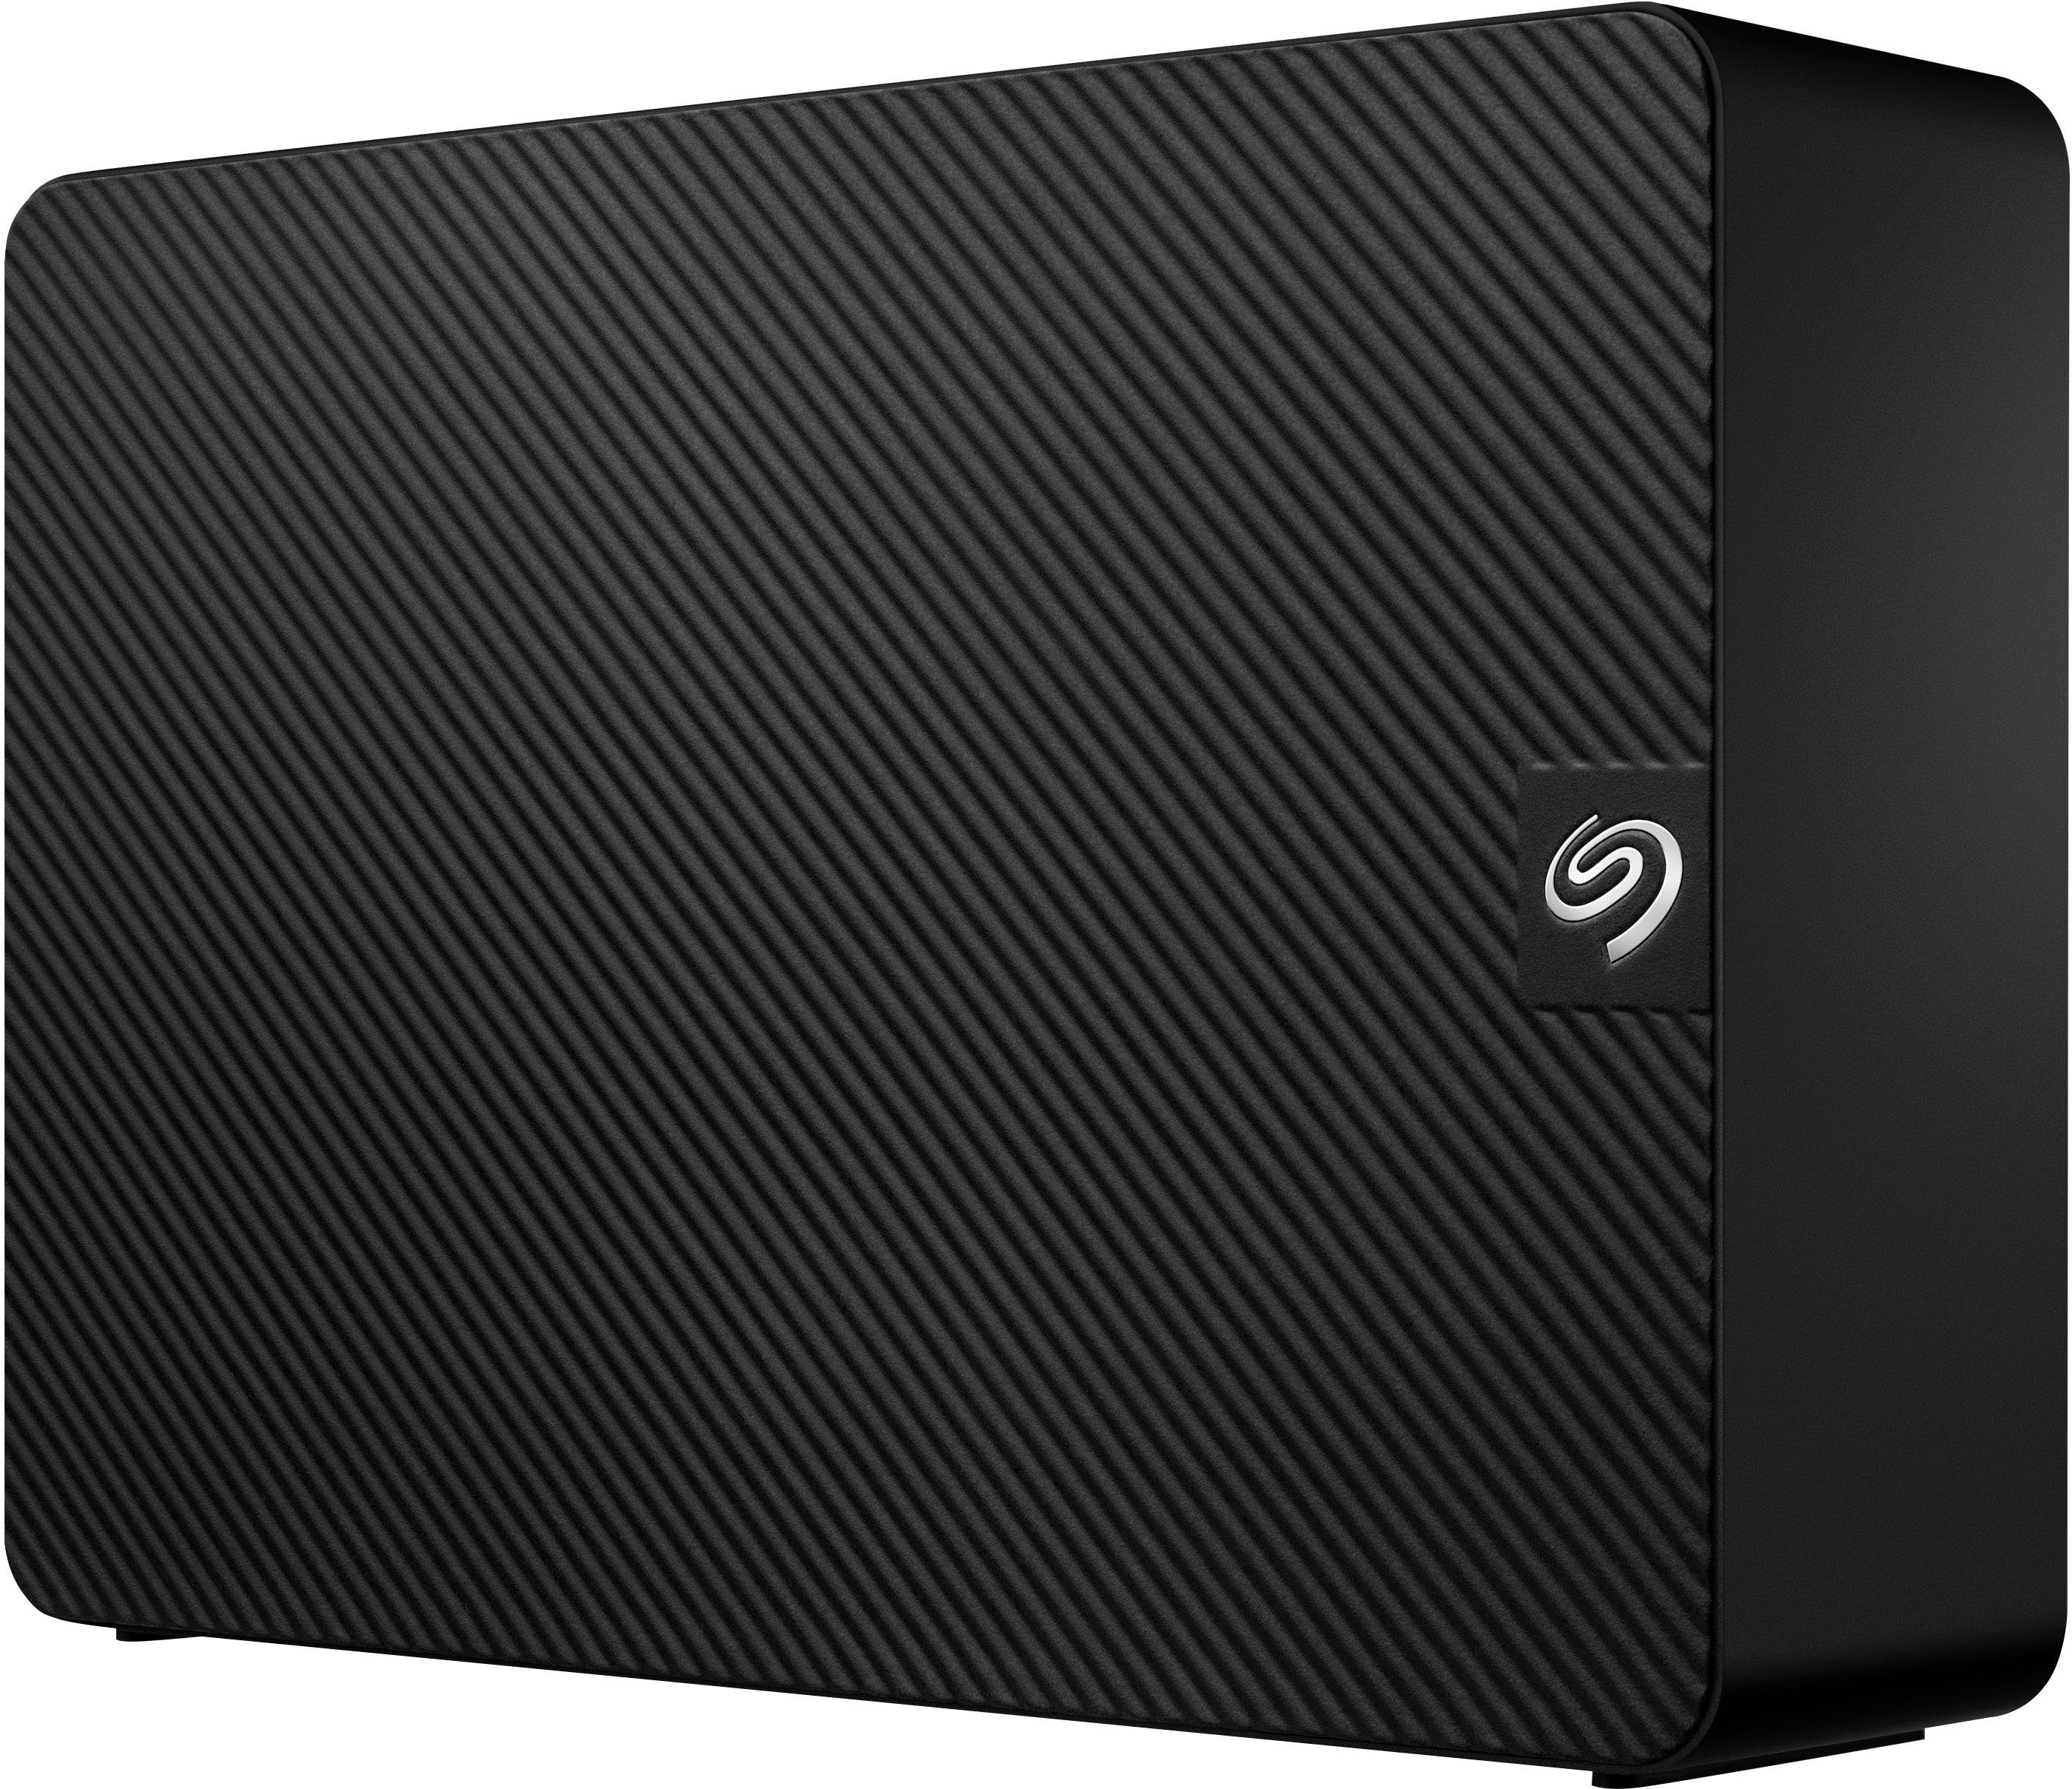 Angle View: Seagate - FireCuda Gaming 2TB External USB 3.2 Gen 1 Hard Drive with RGB LED Lighting